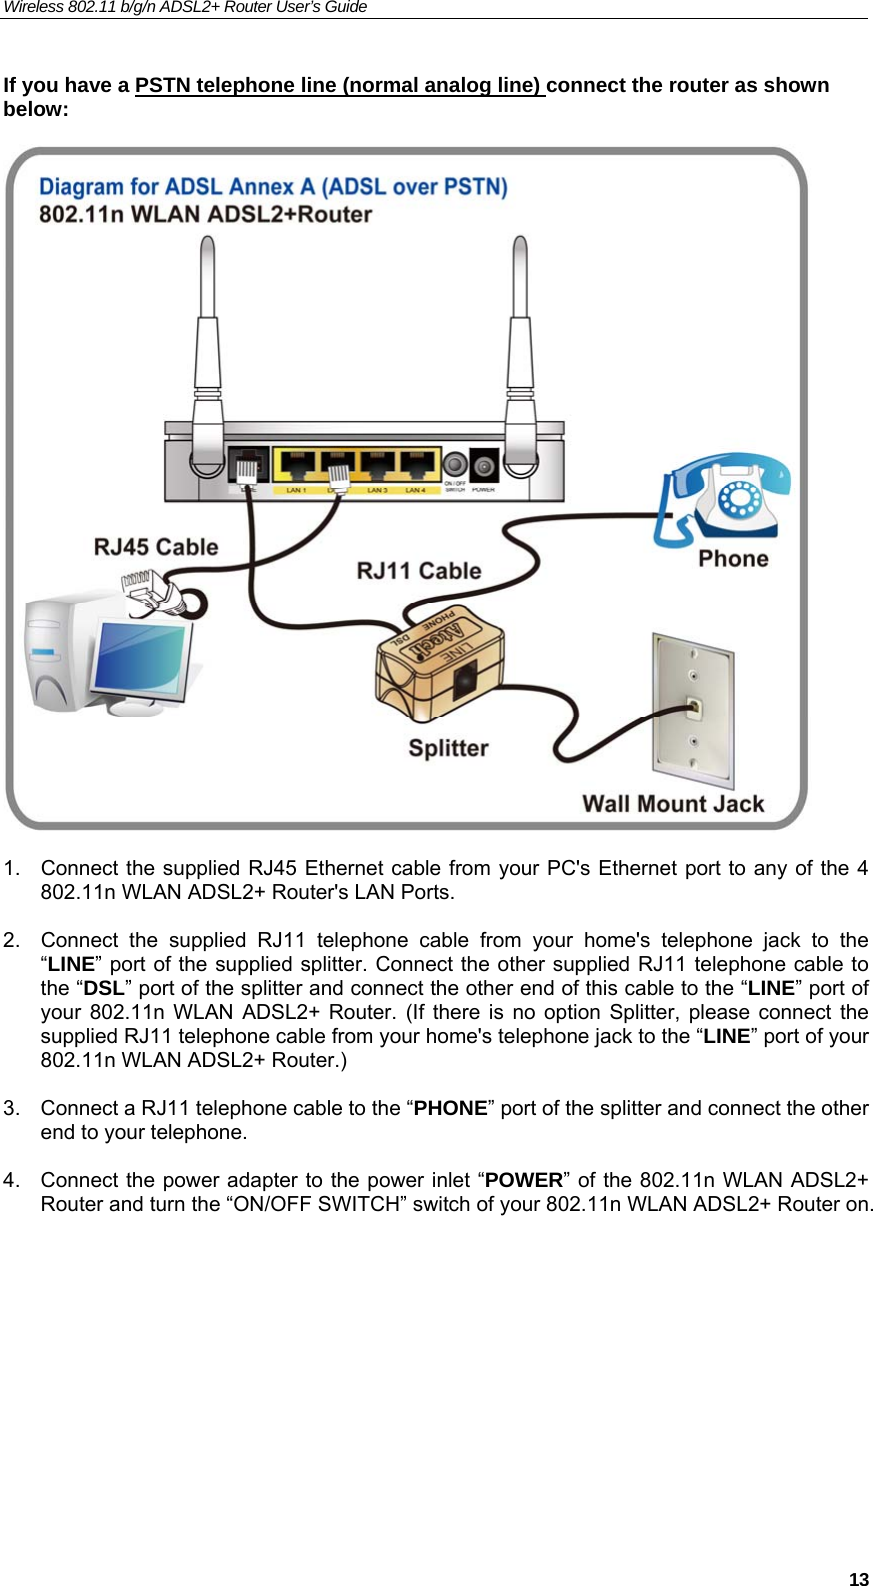 Wireless 802.11 b/g/n ADSL2+ Router User’s Guide    If you have a PSTN telephone line (normal analog line) connect the router as shown below:     1.  Connect the supplied RJ45 Ethernet cable from your PC&apos;s Ethernet port to any of the 4 802.11n WLAN ADSL2+ Router&apos;s LAN Ports.  2.  Connect the supplied RJ11 telephone cable from your home&apos;s telephone jack to the “LINE” port of the supplied splitter. Connect the other supplied RJ11 telephone cable to the “DSL” port of the splitter and connect the other end of this cable to the “LINE” port of your 802.11n WLAN ADSL2+ Router. (If there is no option Splitter, please connect the supplied RJ11 telephone cable from your home&apos;s telephone jack to the “LINE” port of your 802.11n WLAN ADSL2+ Router.)  3.  Connect a RJ11 telephone cable to the “PHONE” port of the splitter and connect the other end to your telephone.  4.  Connect the power adapter to the power inlet “POWER” of the 802.11n WLAN ADSL2+ Router and turn the “ON/OFF SWITCH” switch of your 802.11n WLAN ADSL2+ Router on.       13